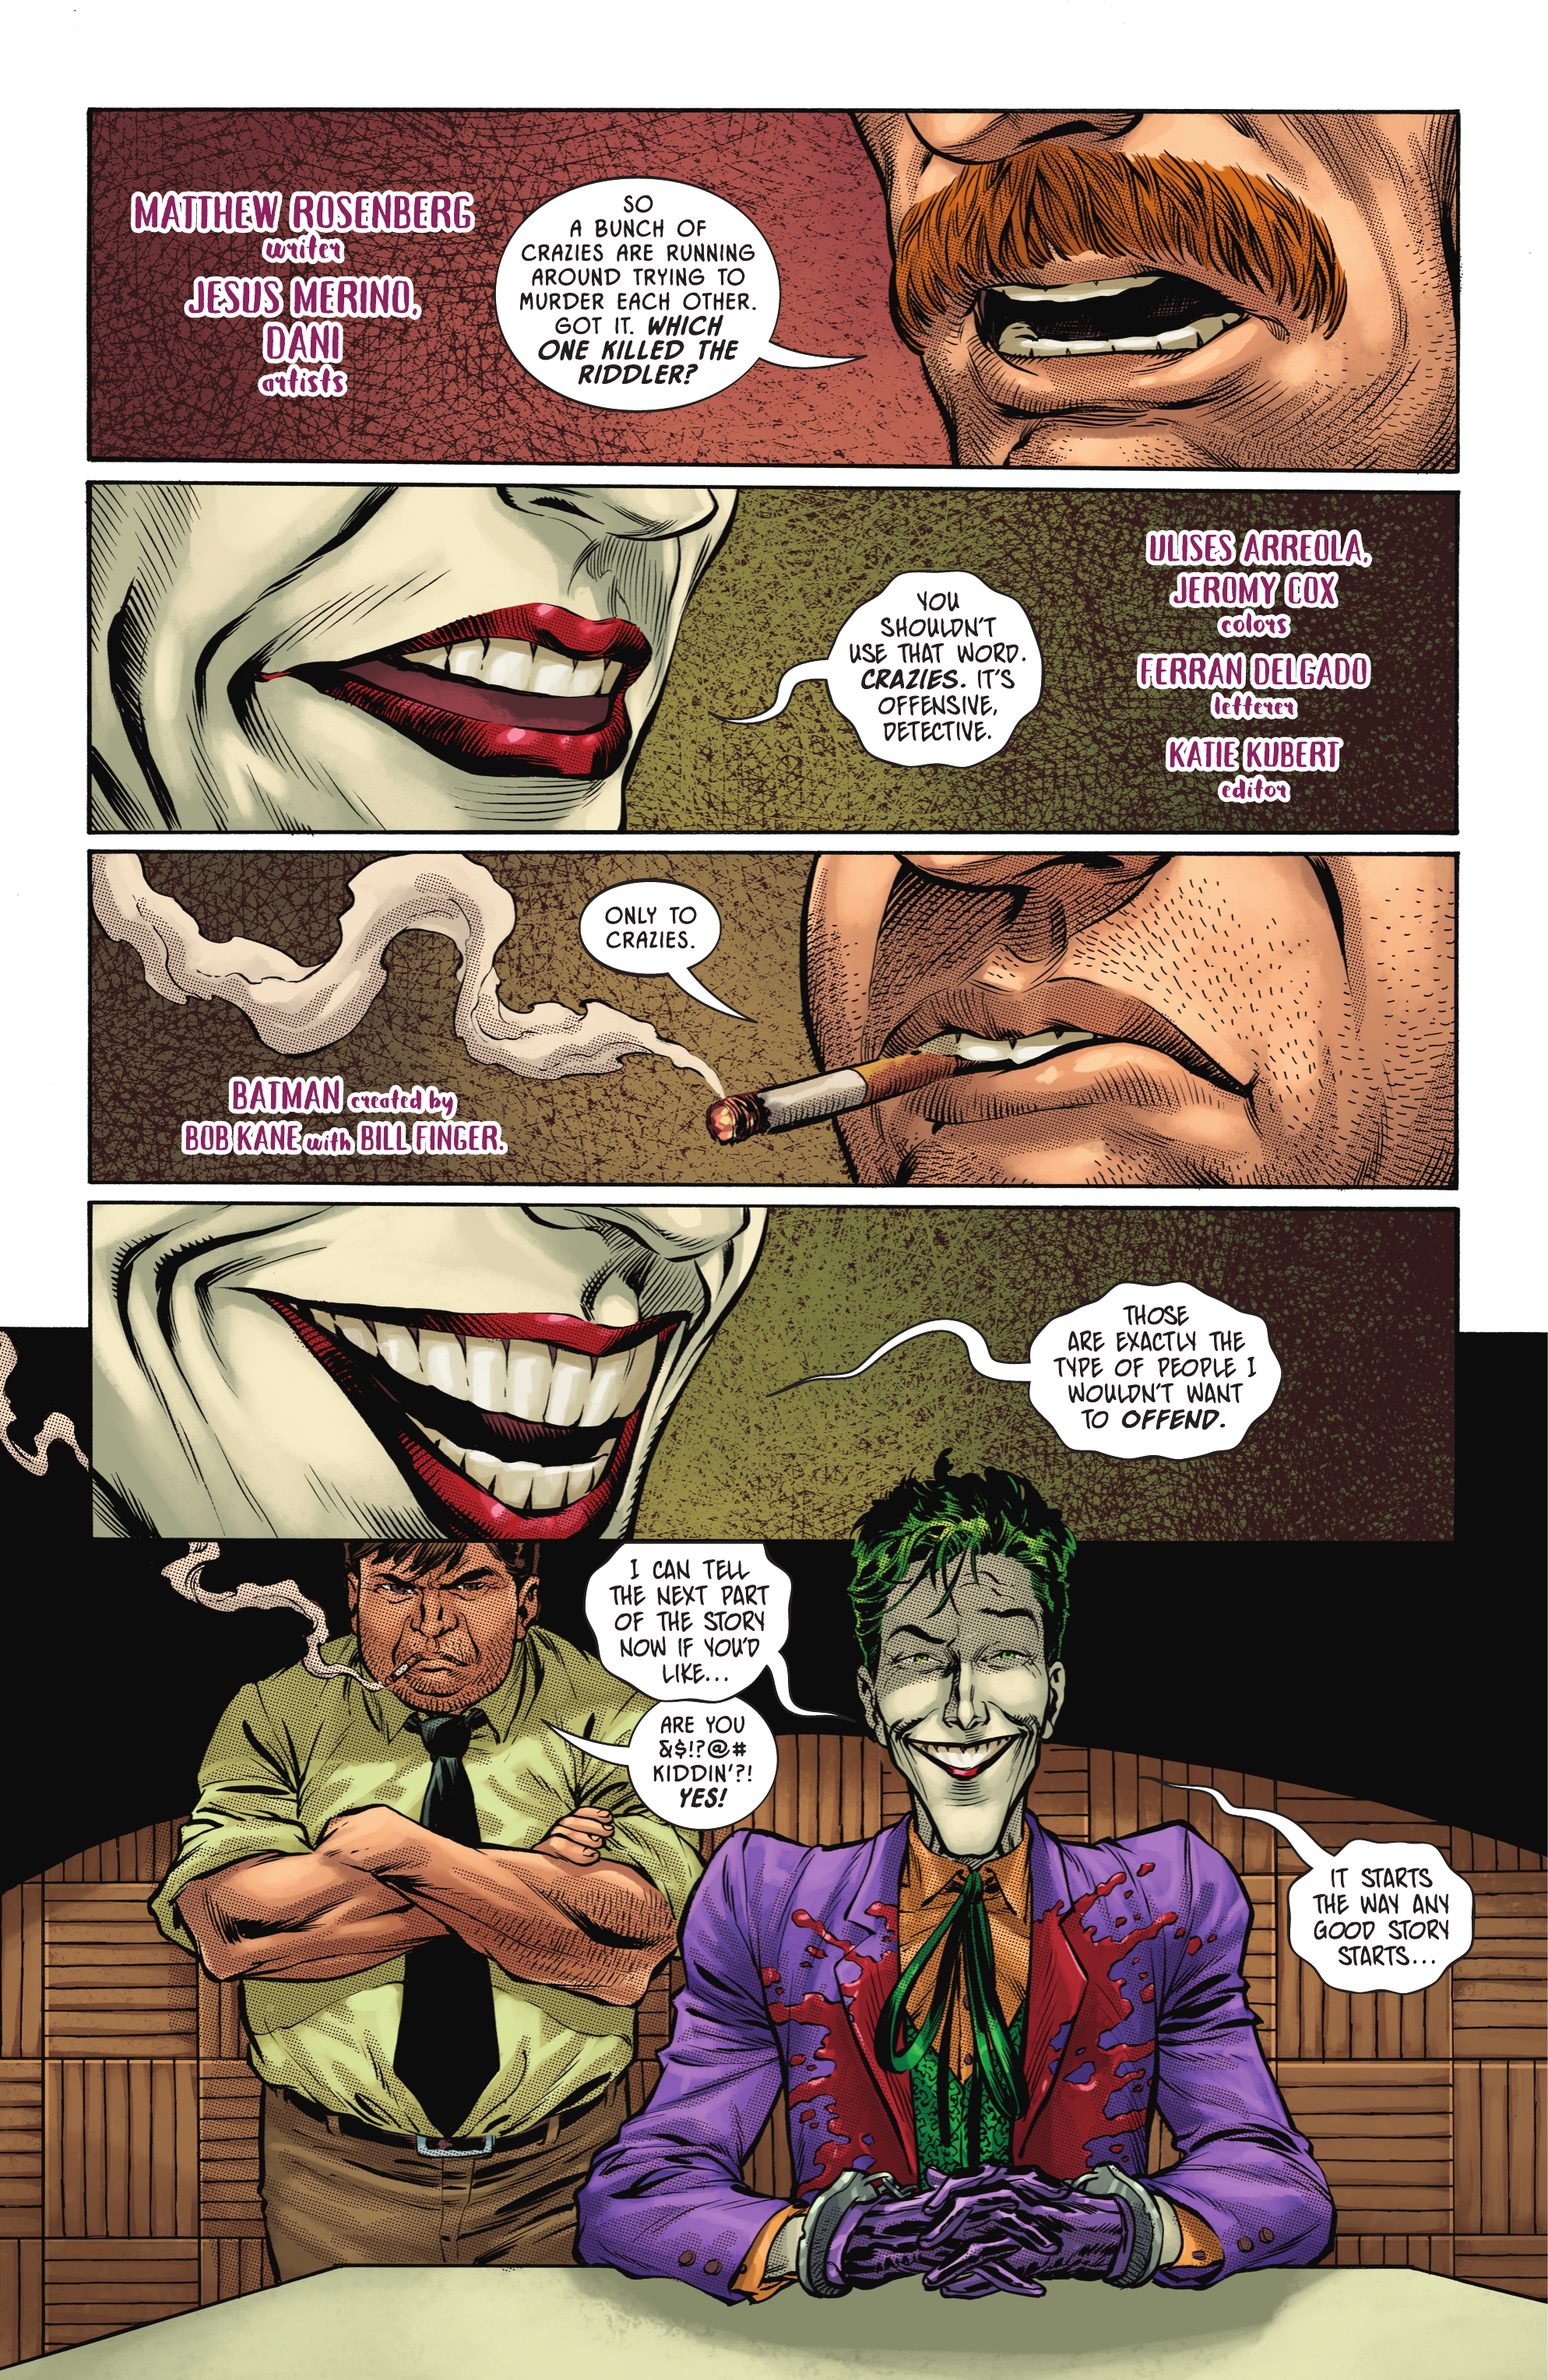 The Joker Presents: A Puzzlebox (2021-): Chapter 4 - Page 2